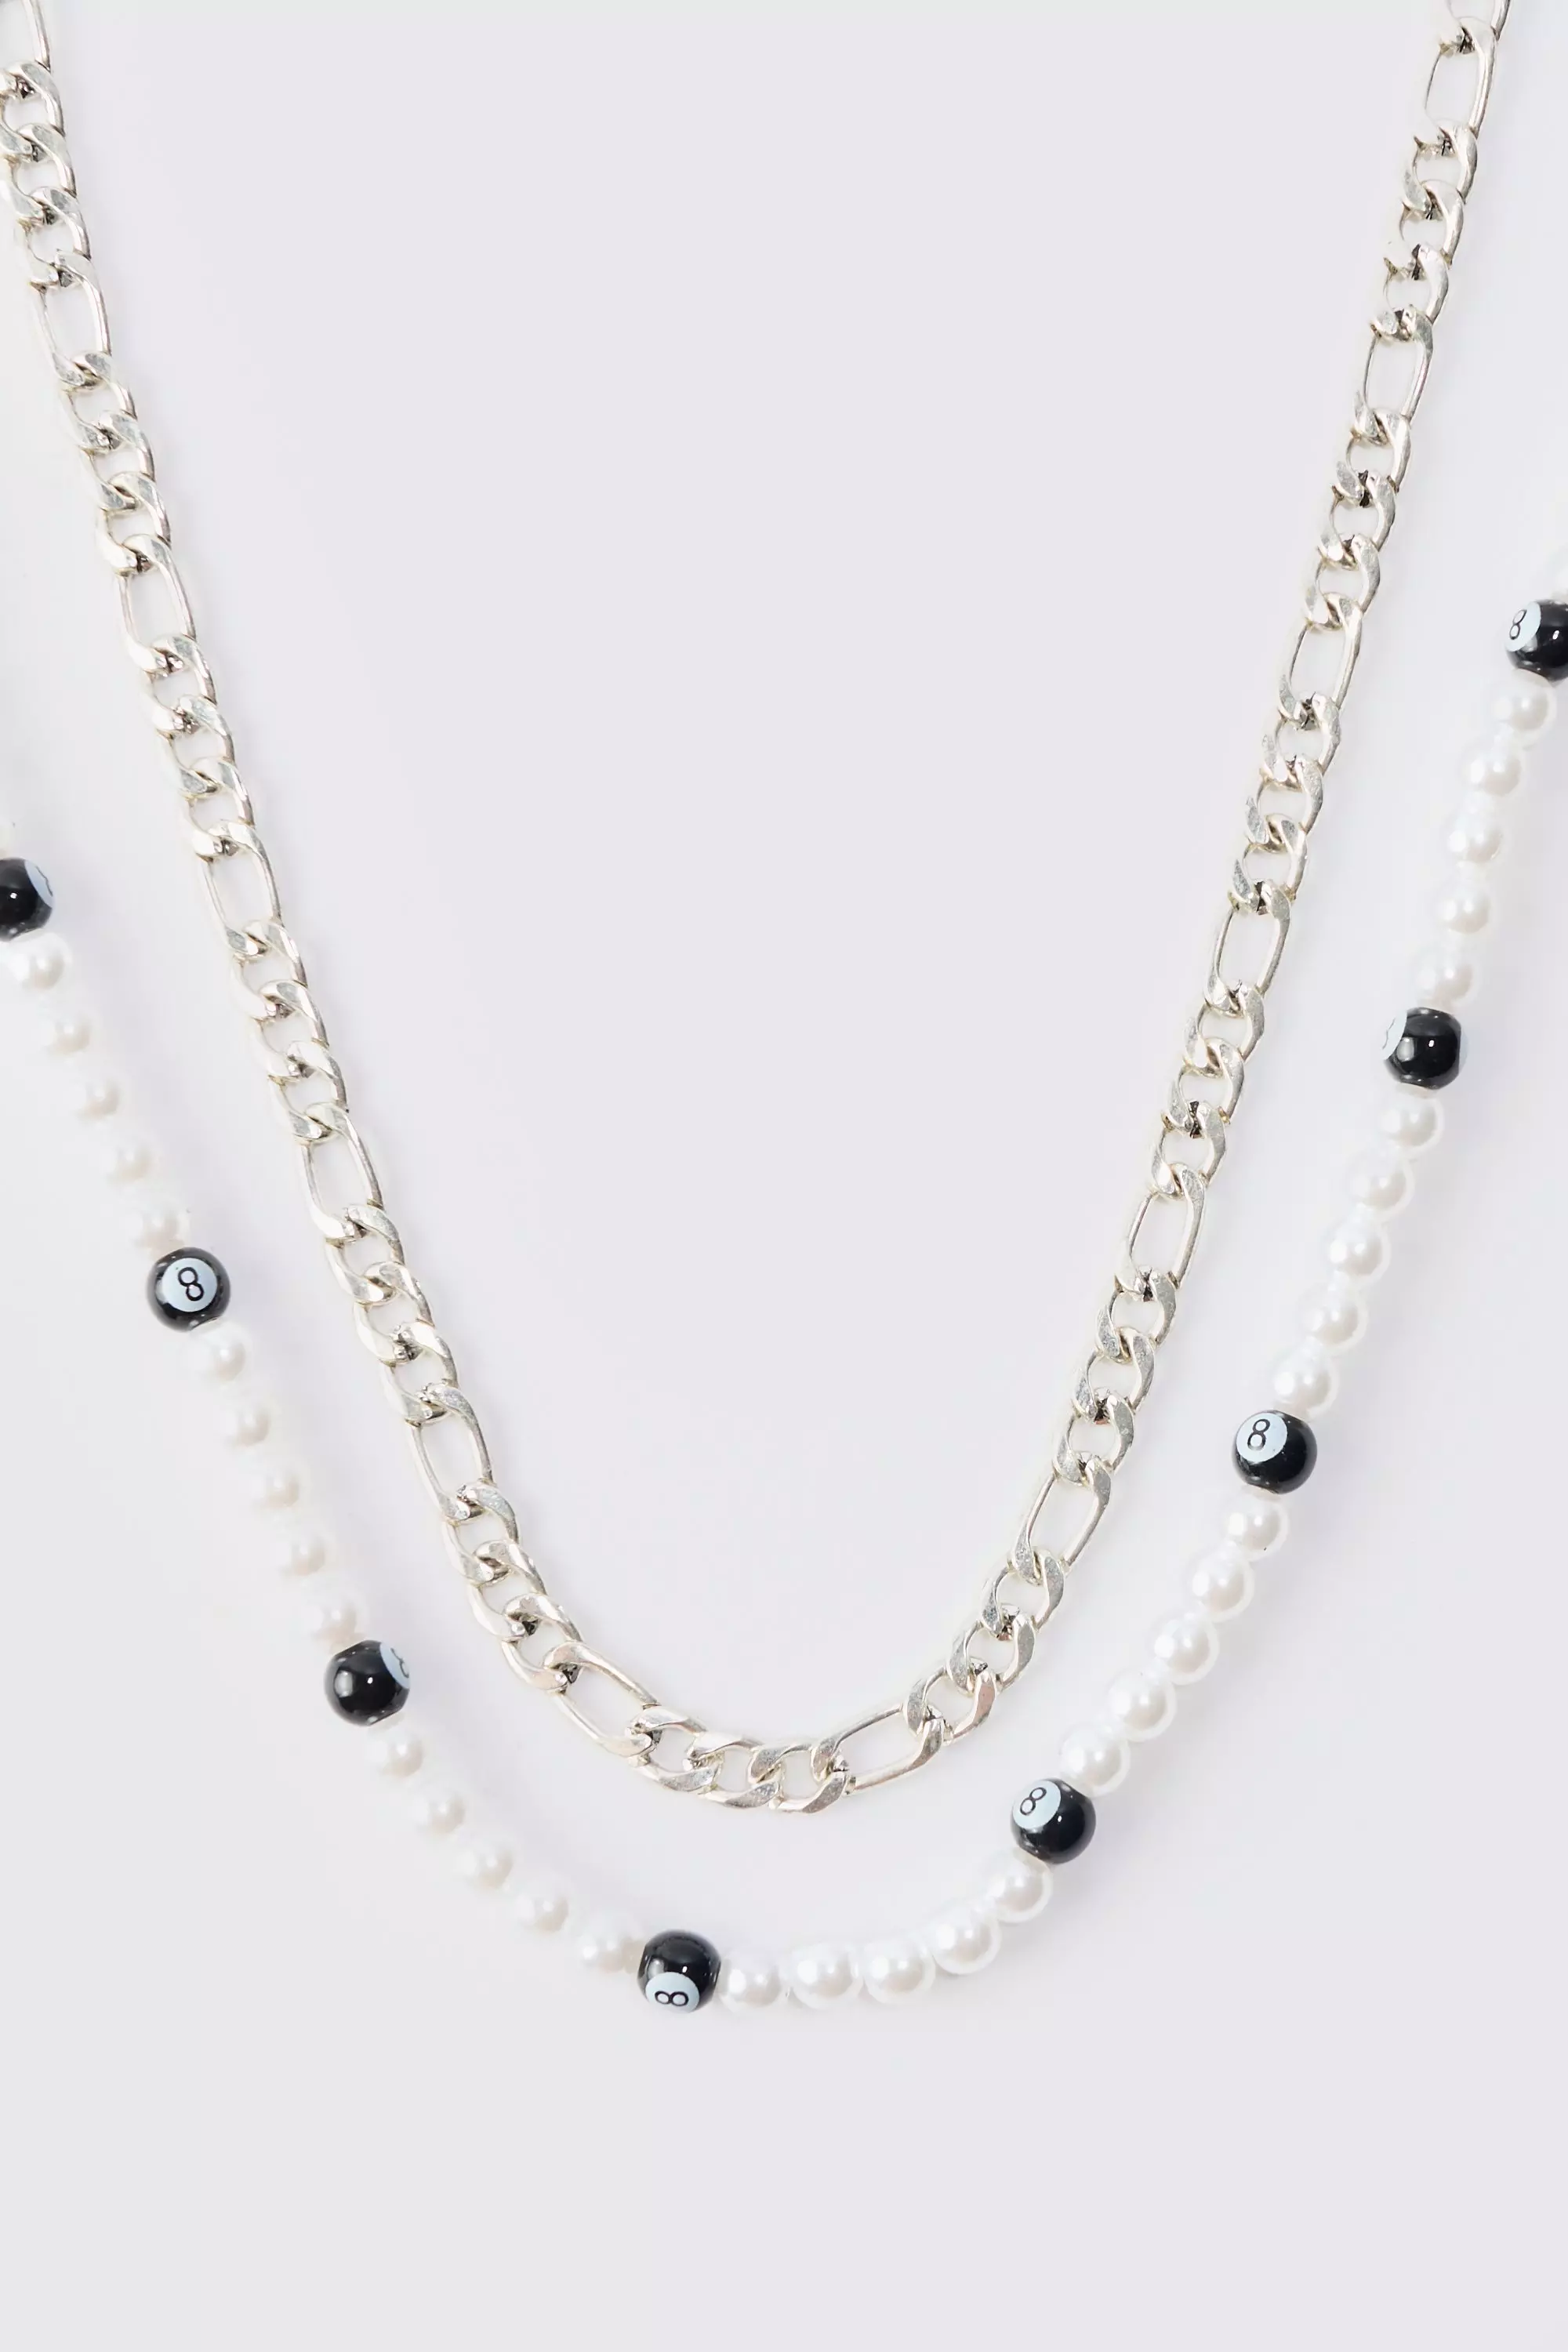 Silver 8 Ball Multilayer Necklace